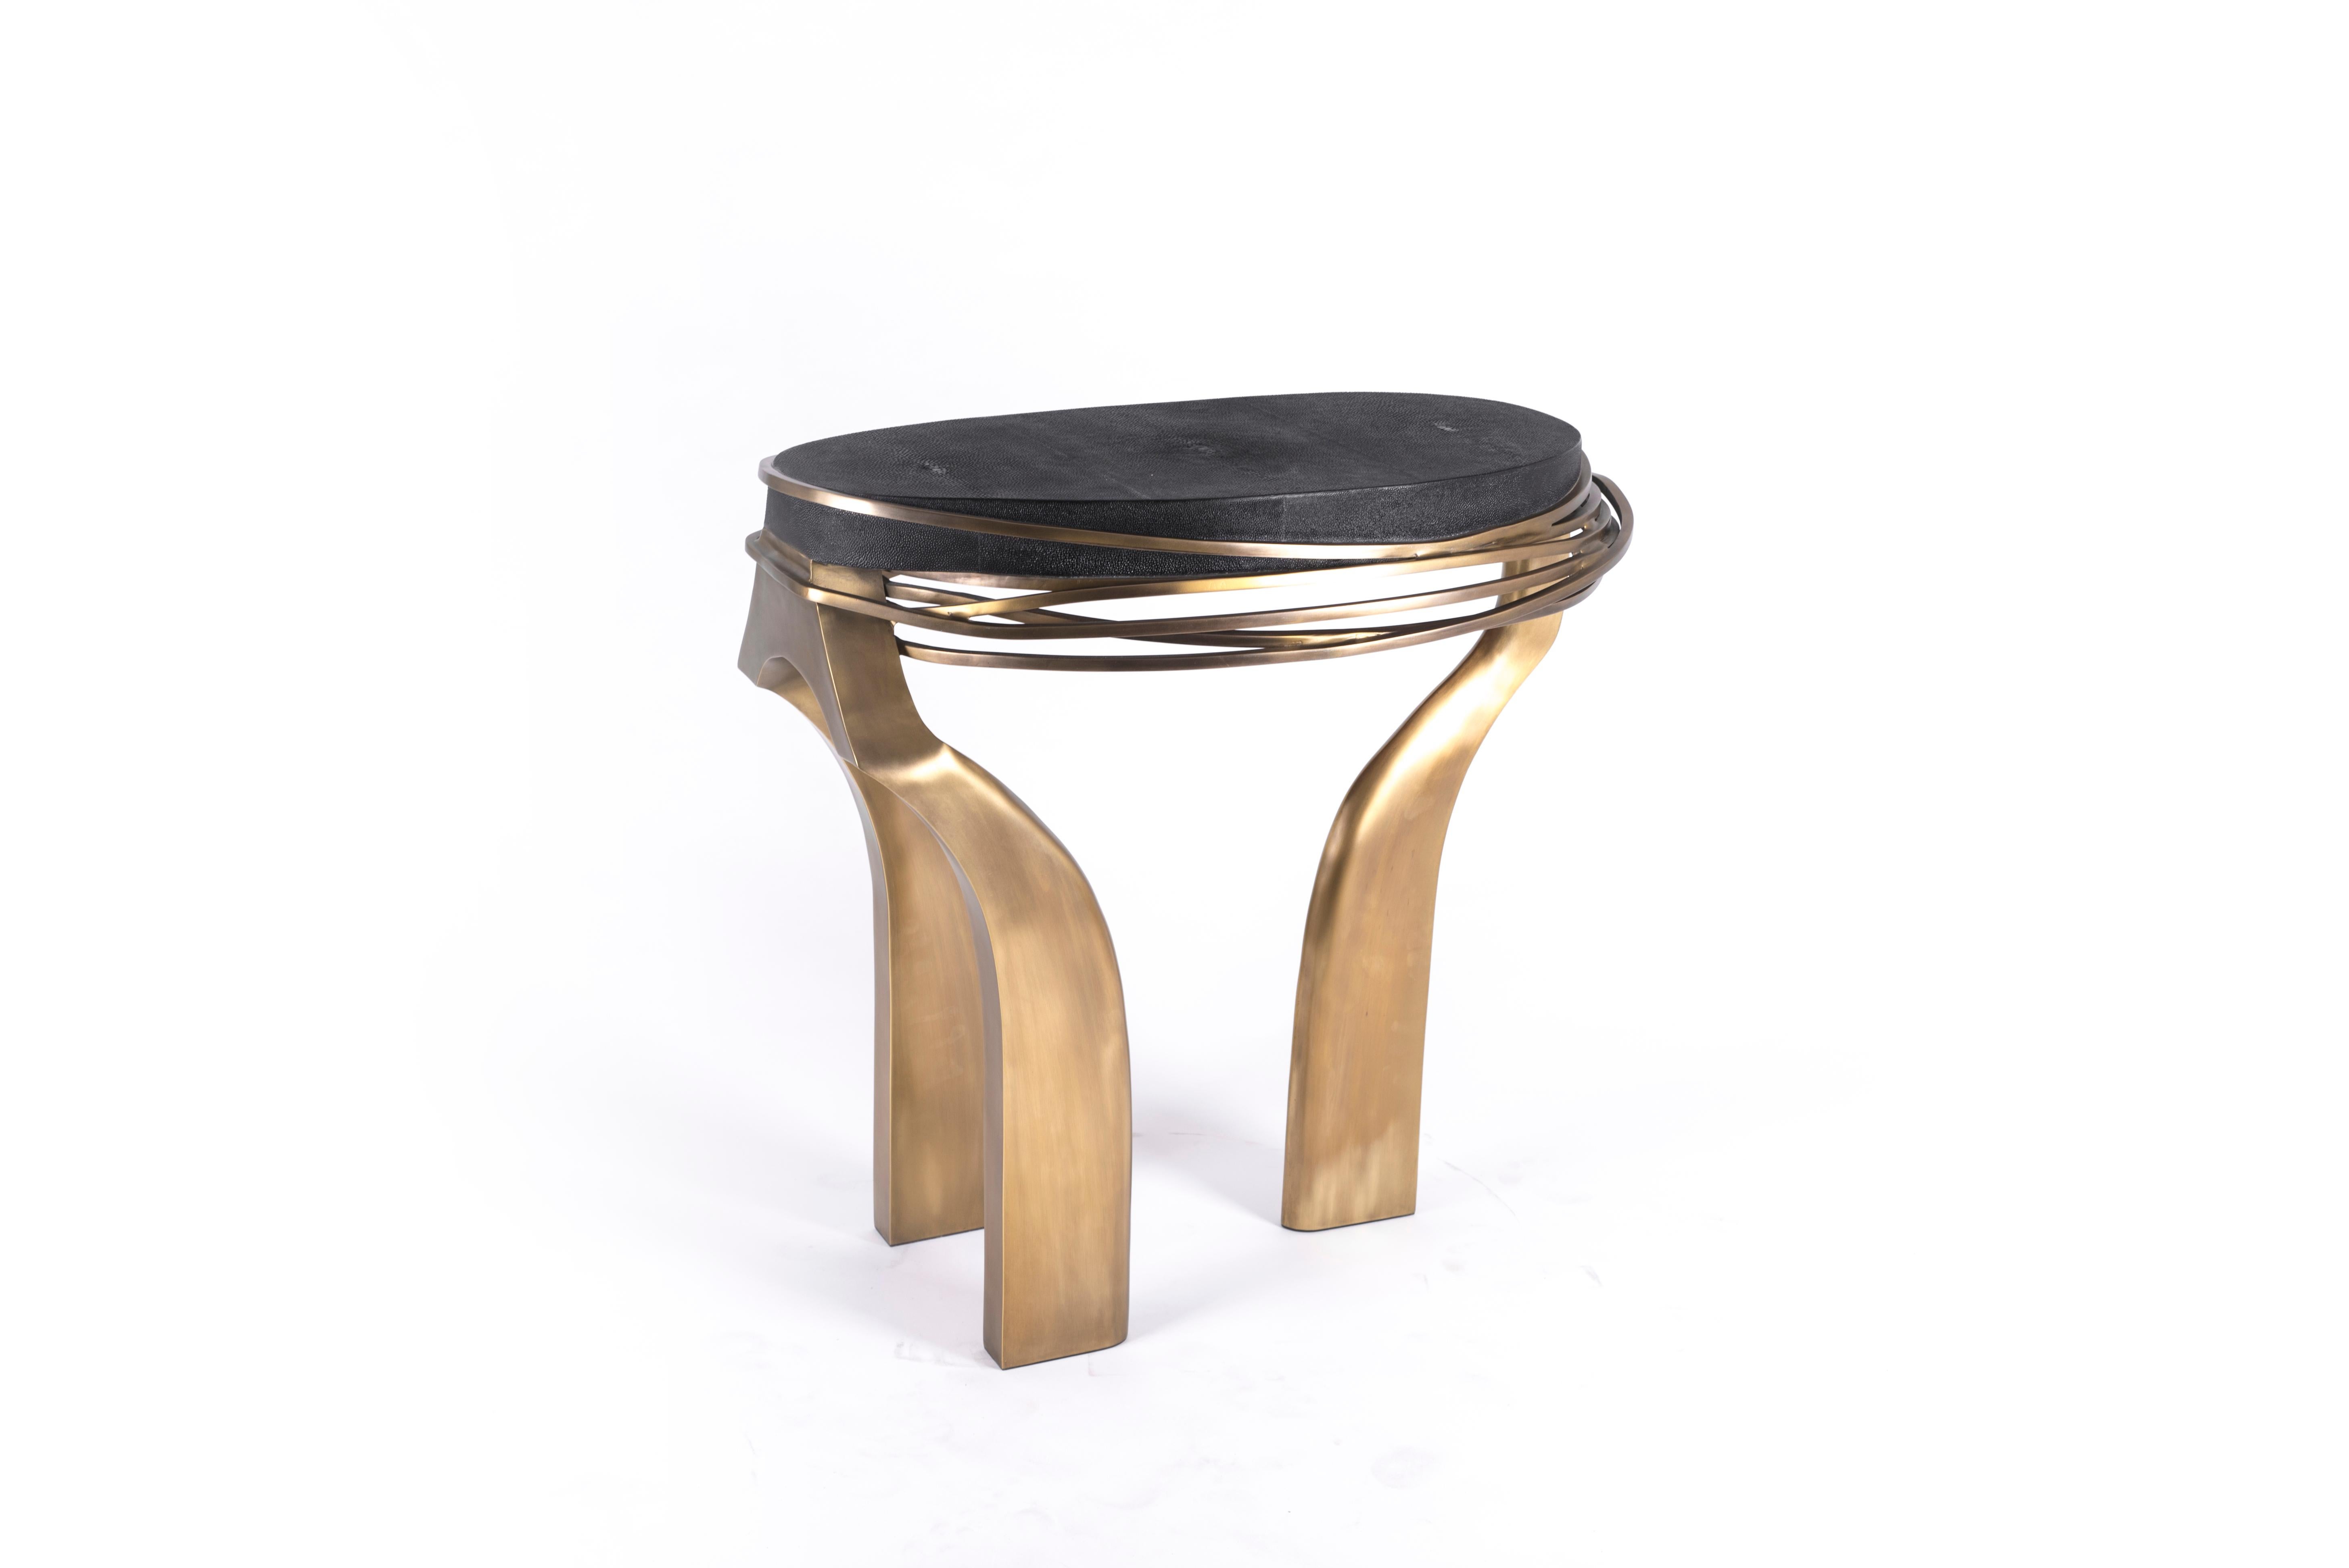 The galaxy side table in Large is an iconic Kifu Paris piece. Whimsical, sculptural and bold this piece makes the ultimate accent piece in any space. The intricate bronze-patina brass rings encircle the coal black shagreen amorphous-shaped inlaid